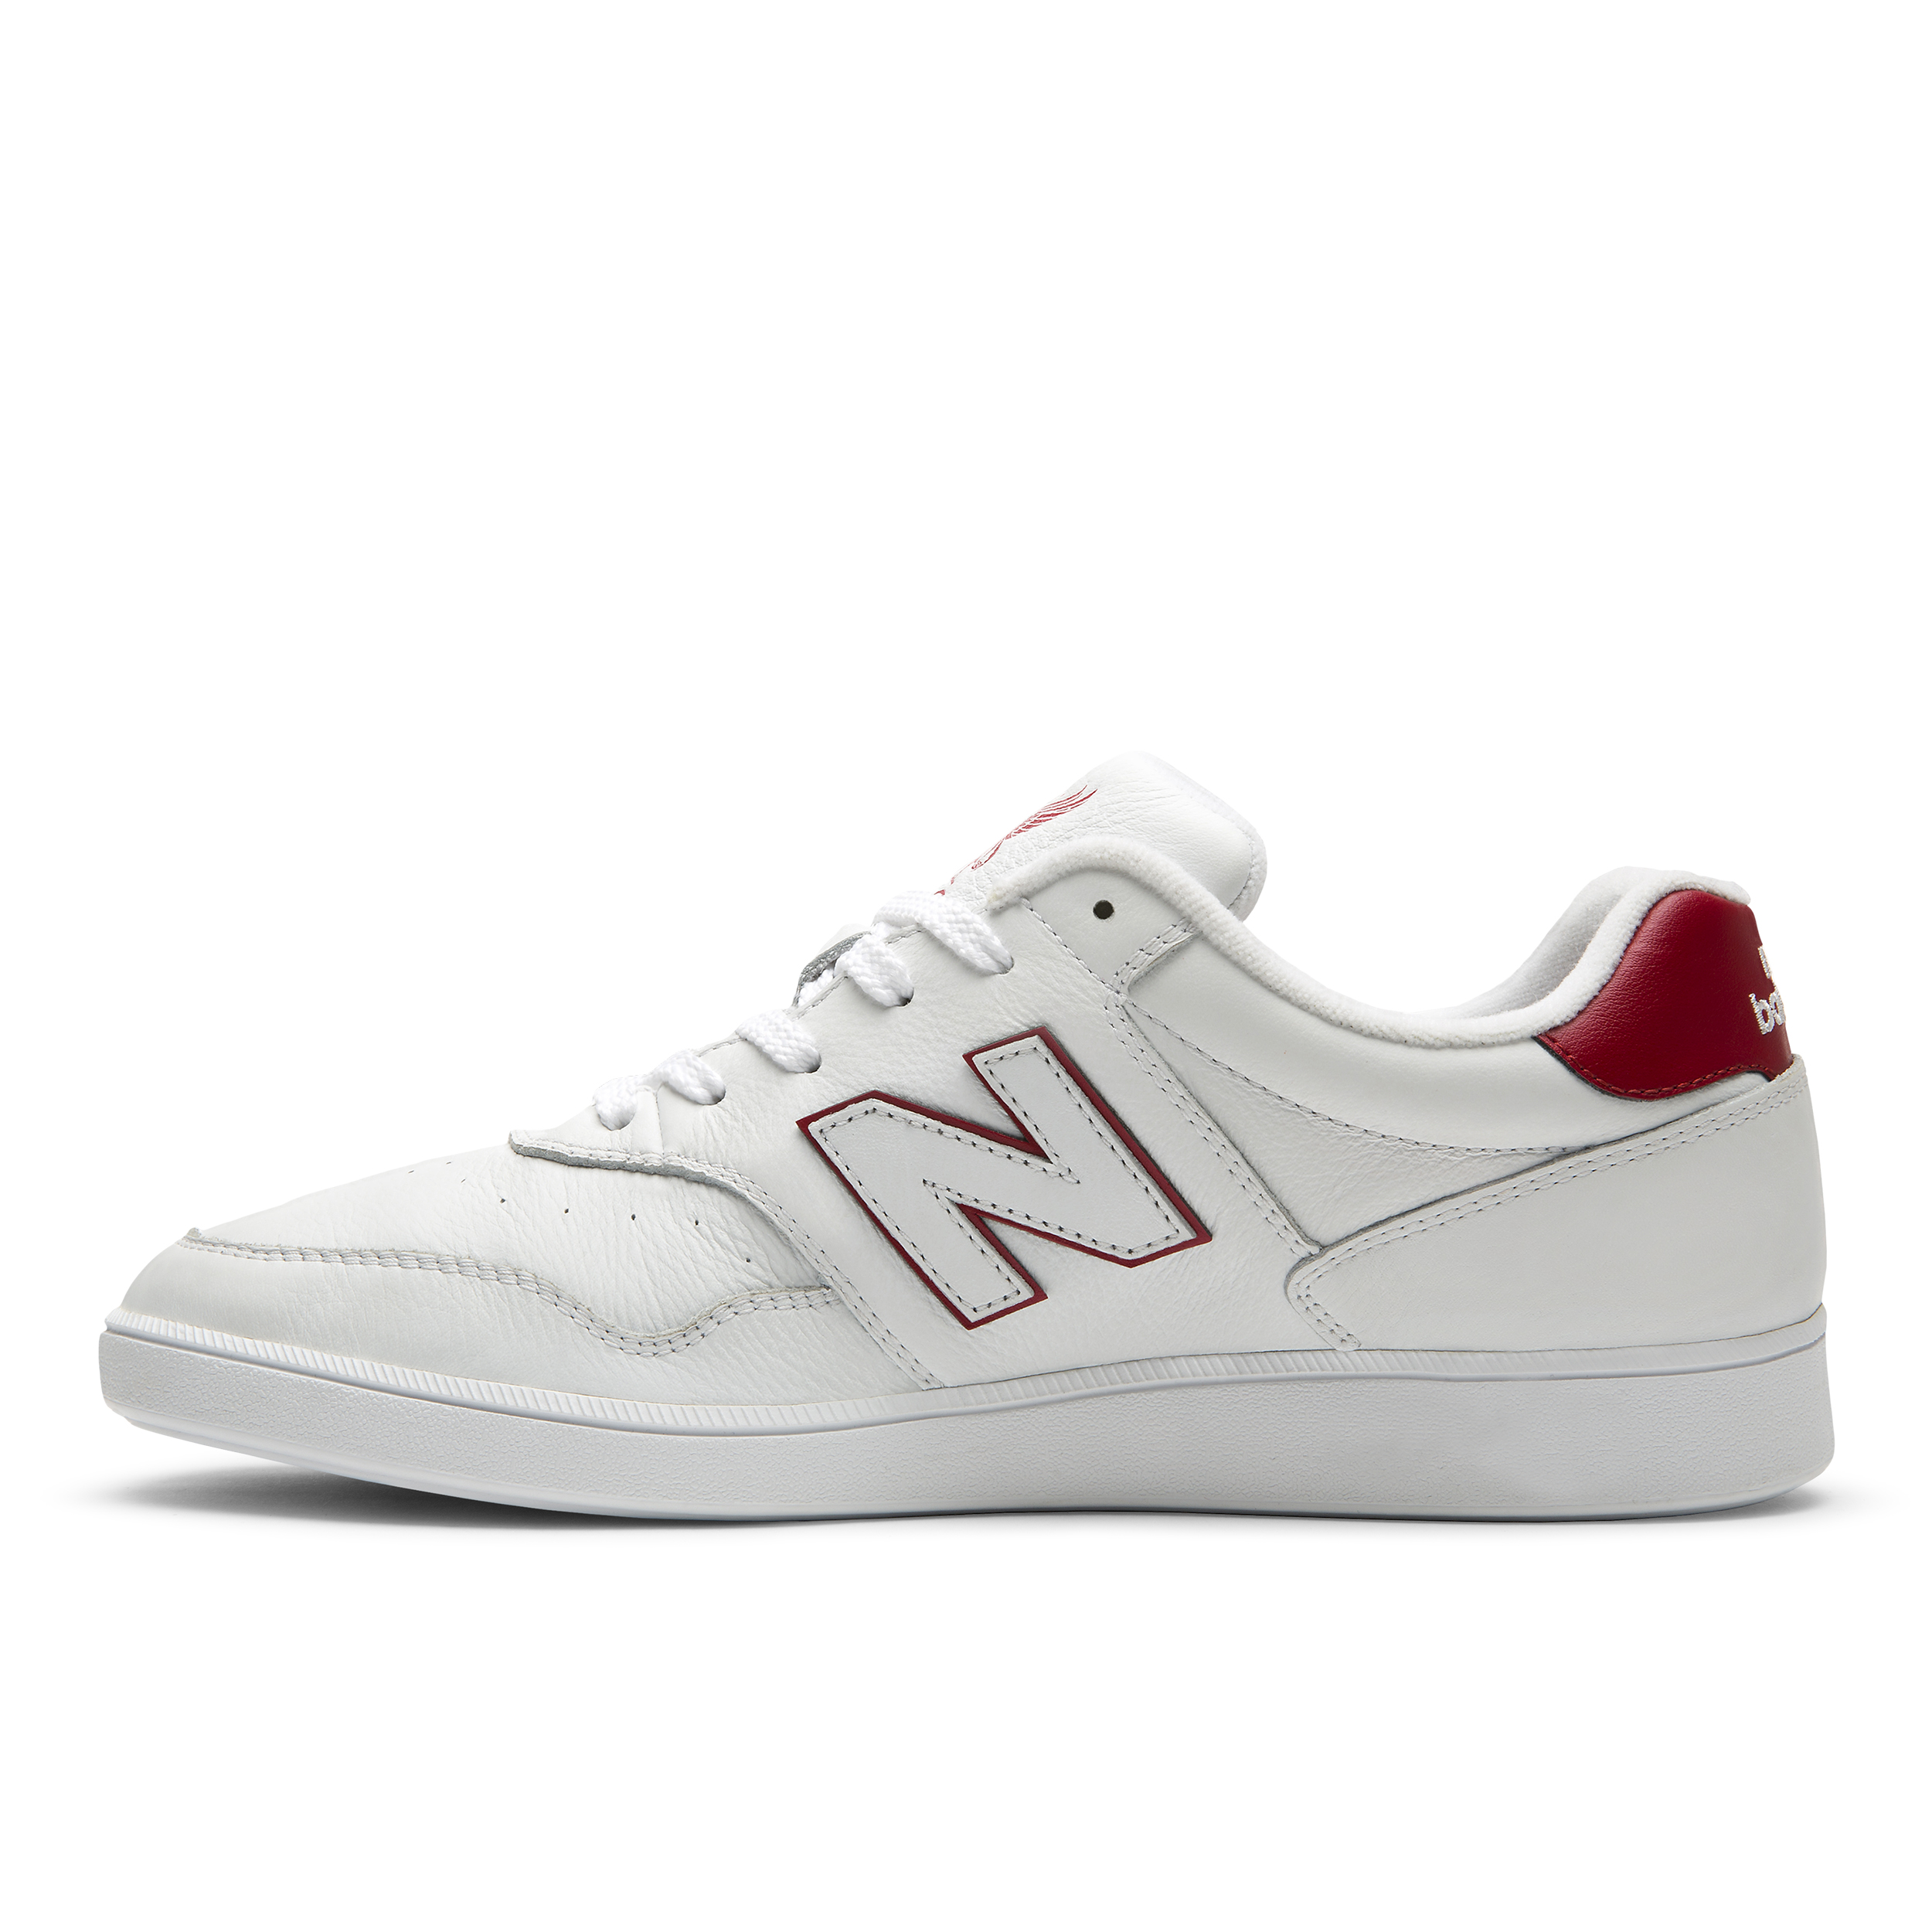 LIVERPOOL CT288 TRAINERS BY NEW BALANCE — IBWM